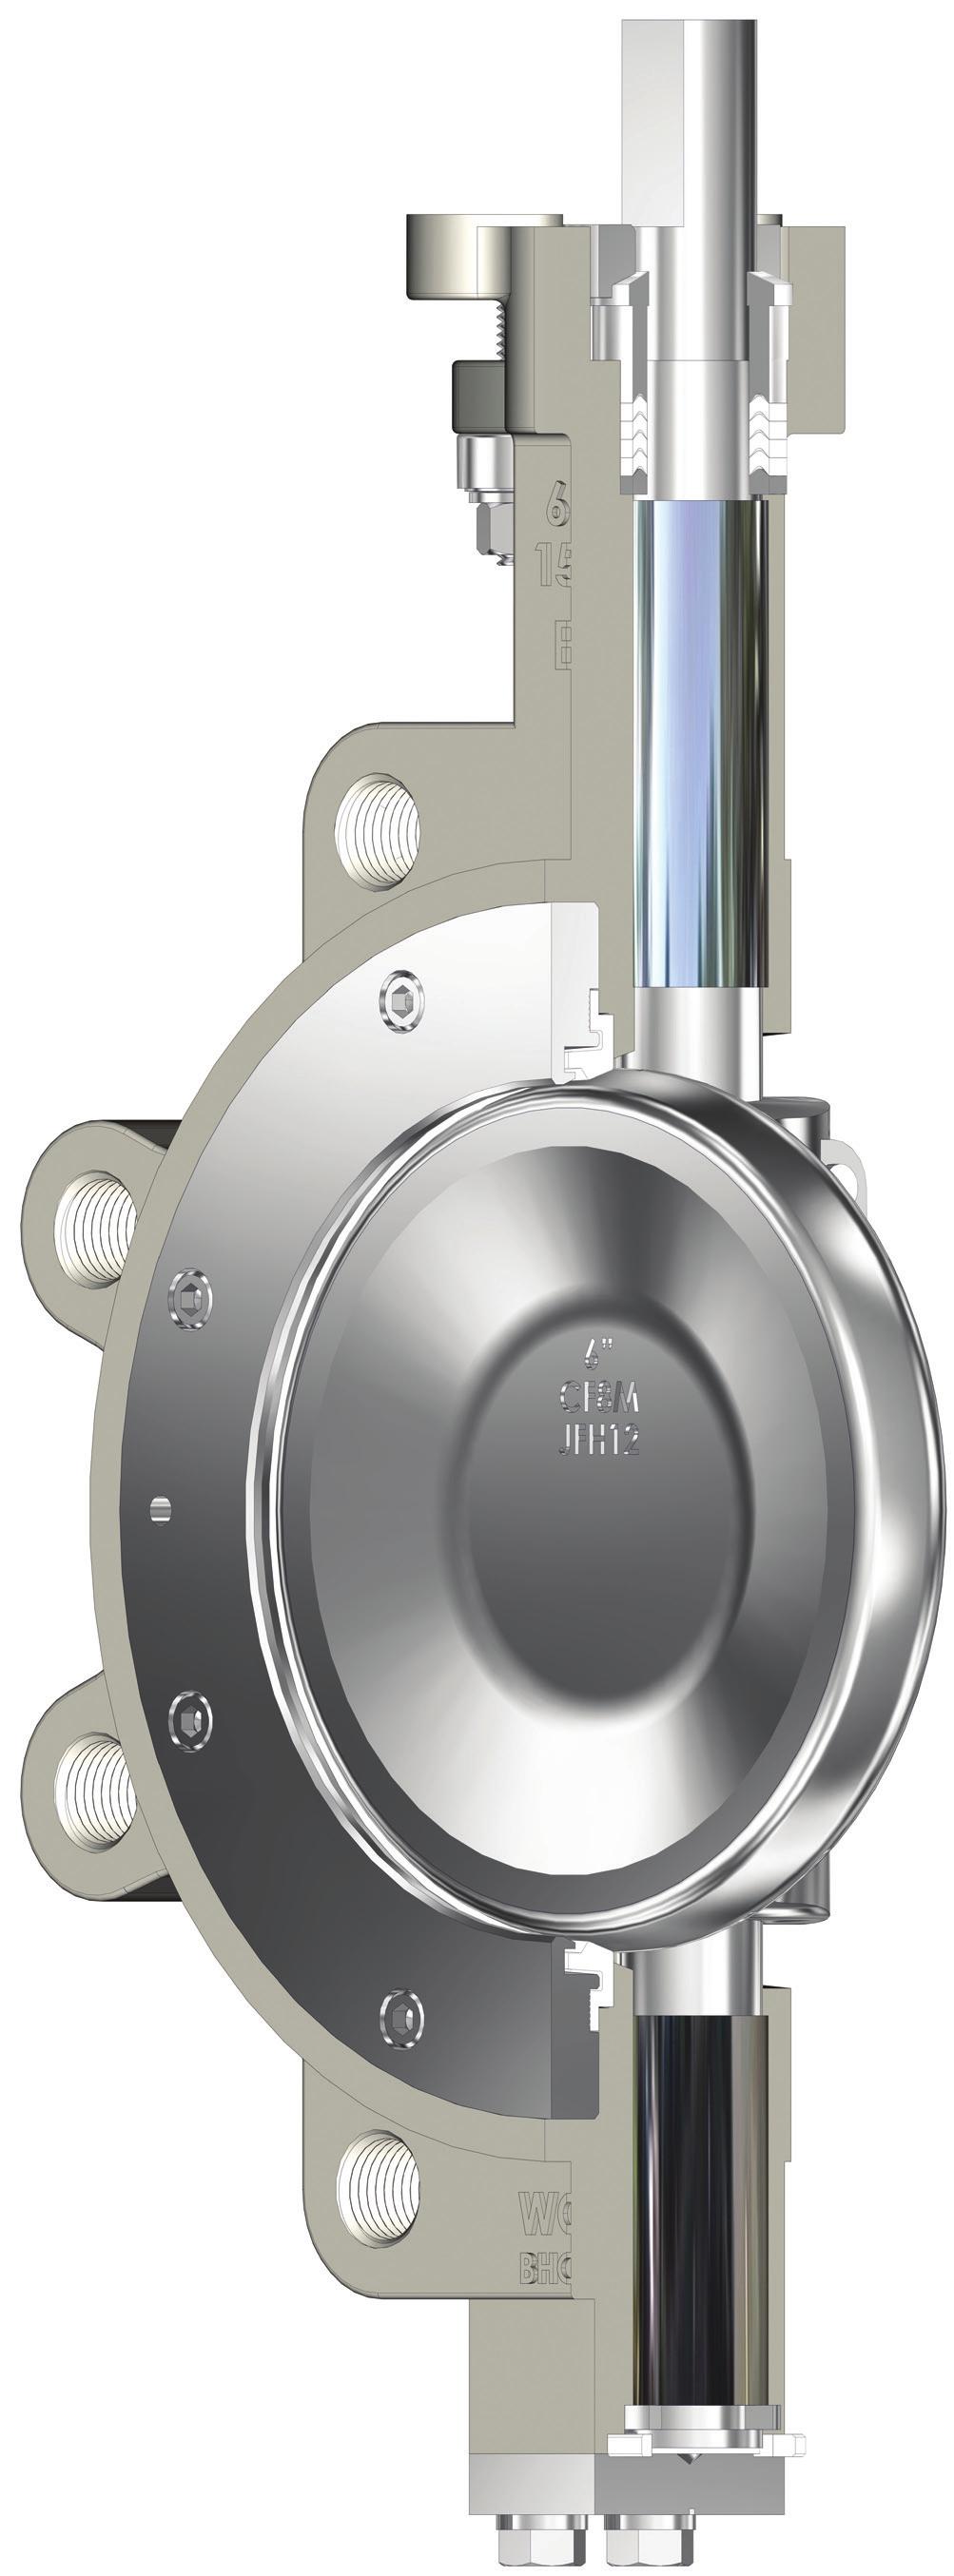 ADVANTAGES DOUBLE OFFSET HIGH PERFORMANCE BUTTERFLY VALVES ISO 5211 MOUNTING FLANGE Universal mounting dimensions simplify valve actuation. Allows for direct mounting of several actuators.